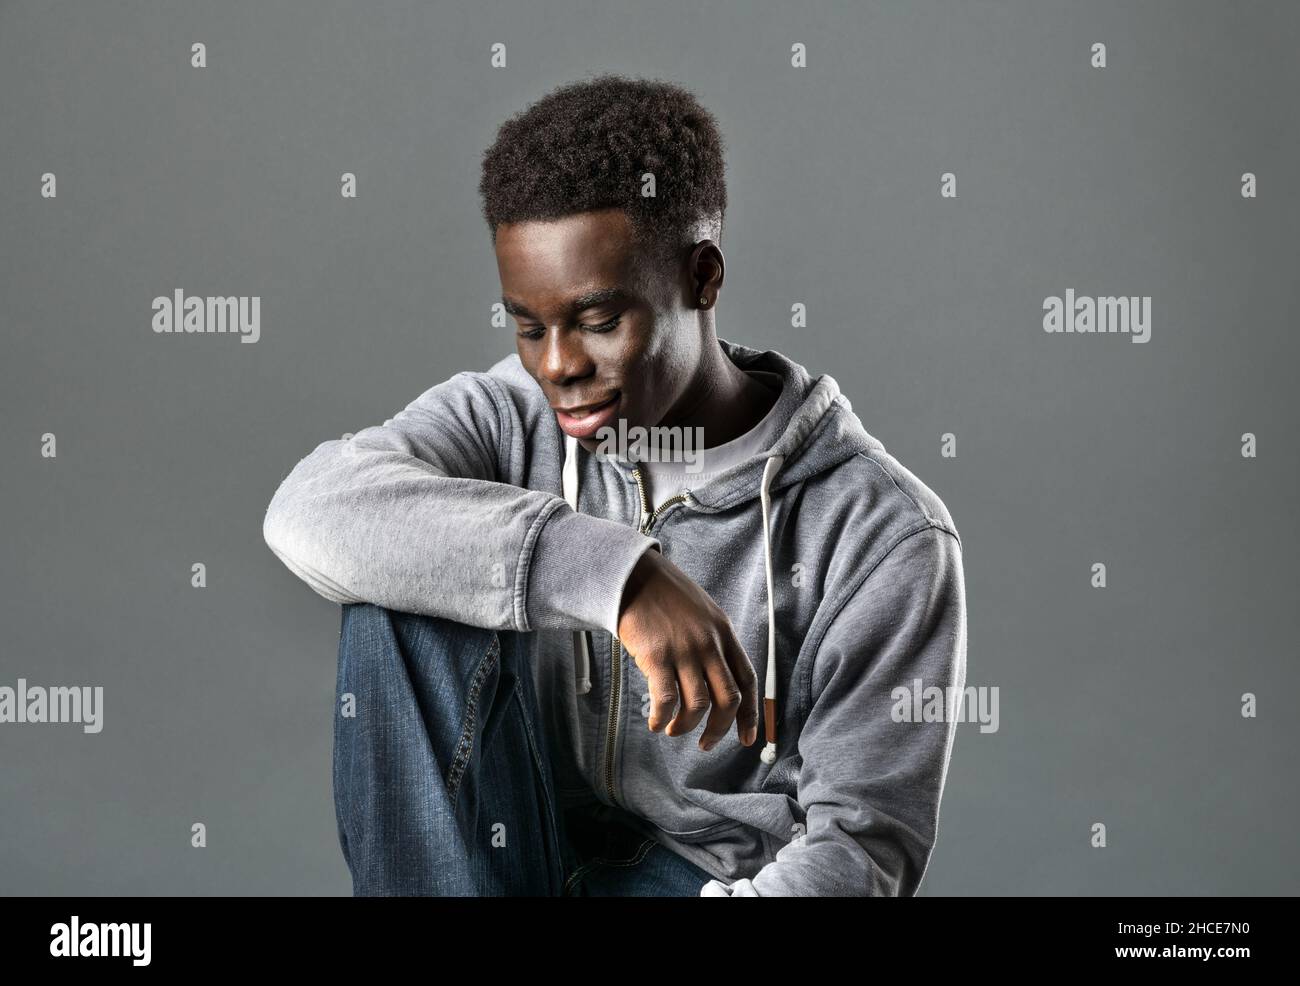 Positive young black male model with dark Afro hair in trendy hoodie and jeans smiling and looking down while sitting against gray background in studi Stock Photo